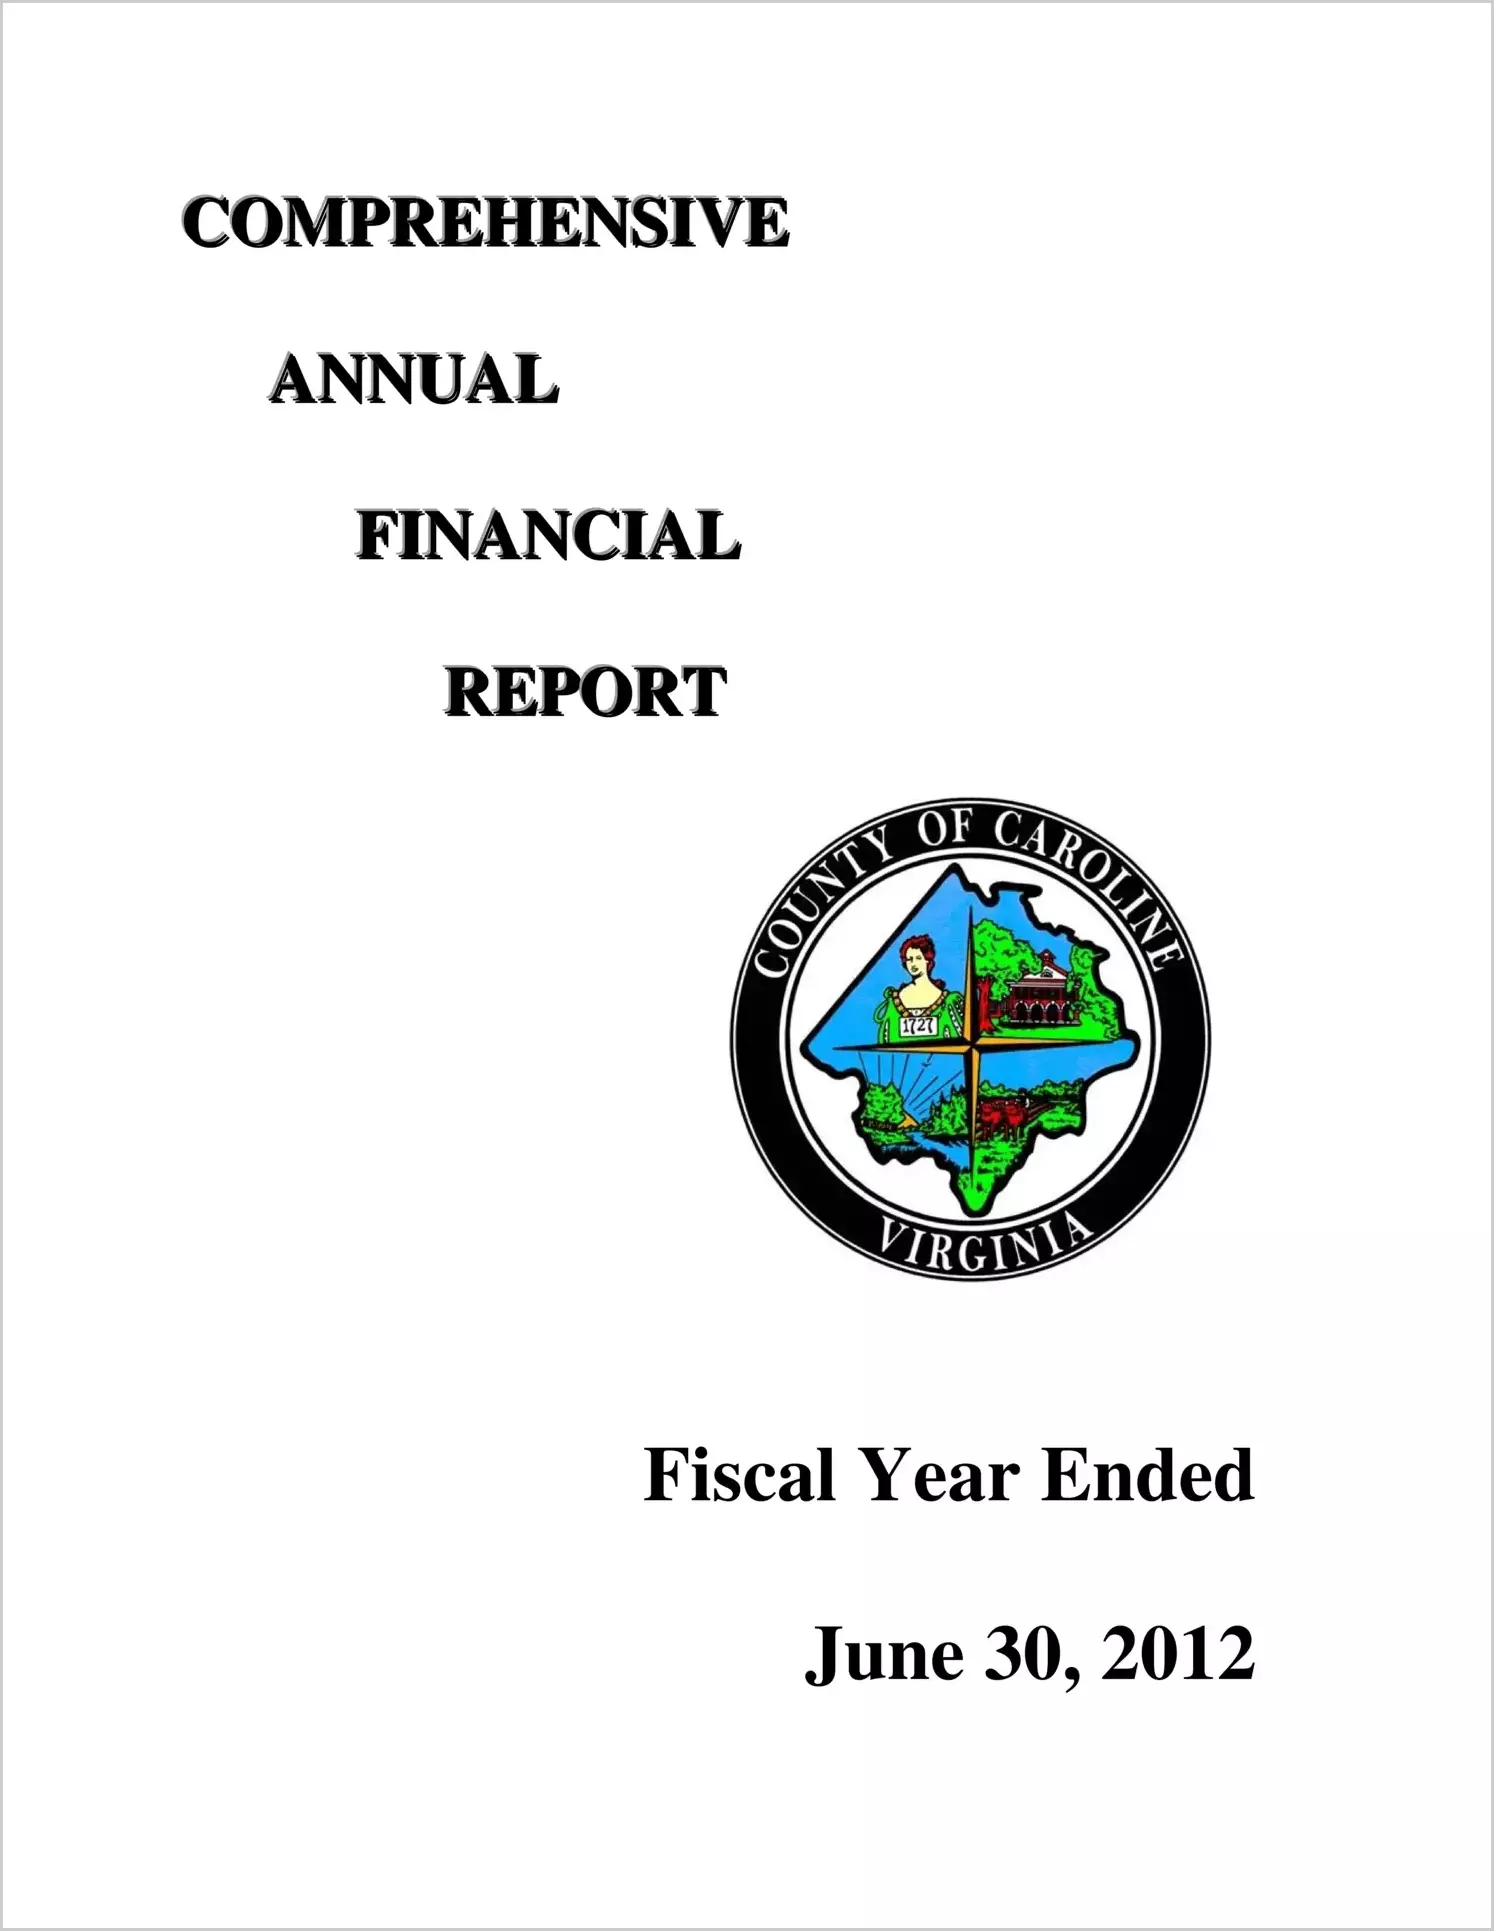 2012 Annual Financial Report for County of Caroline